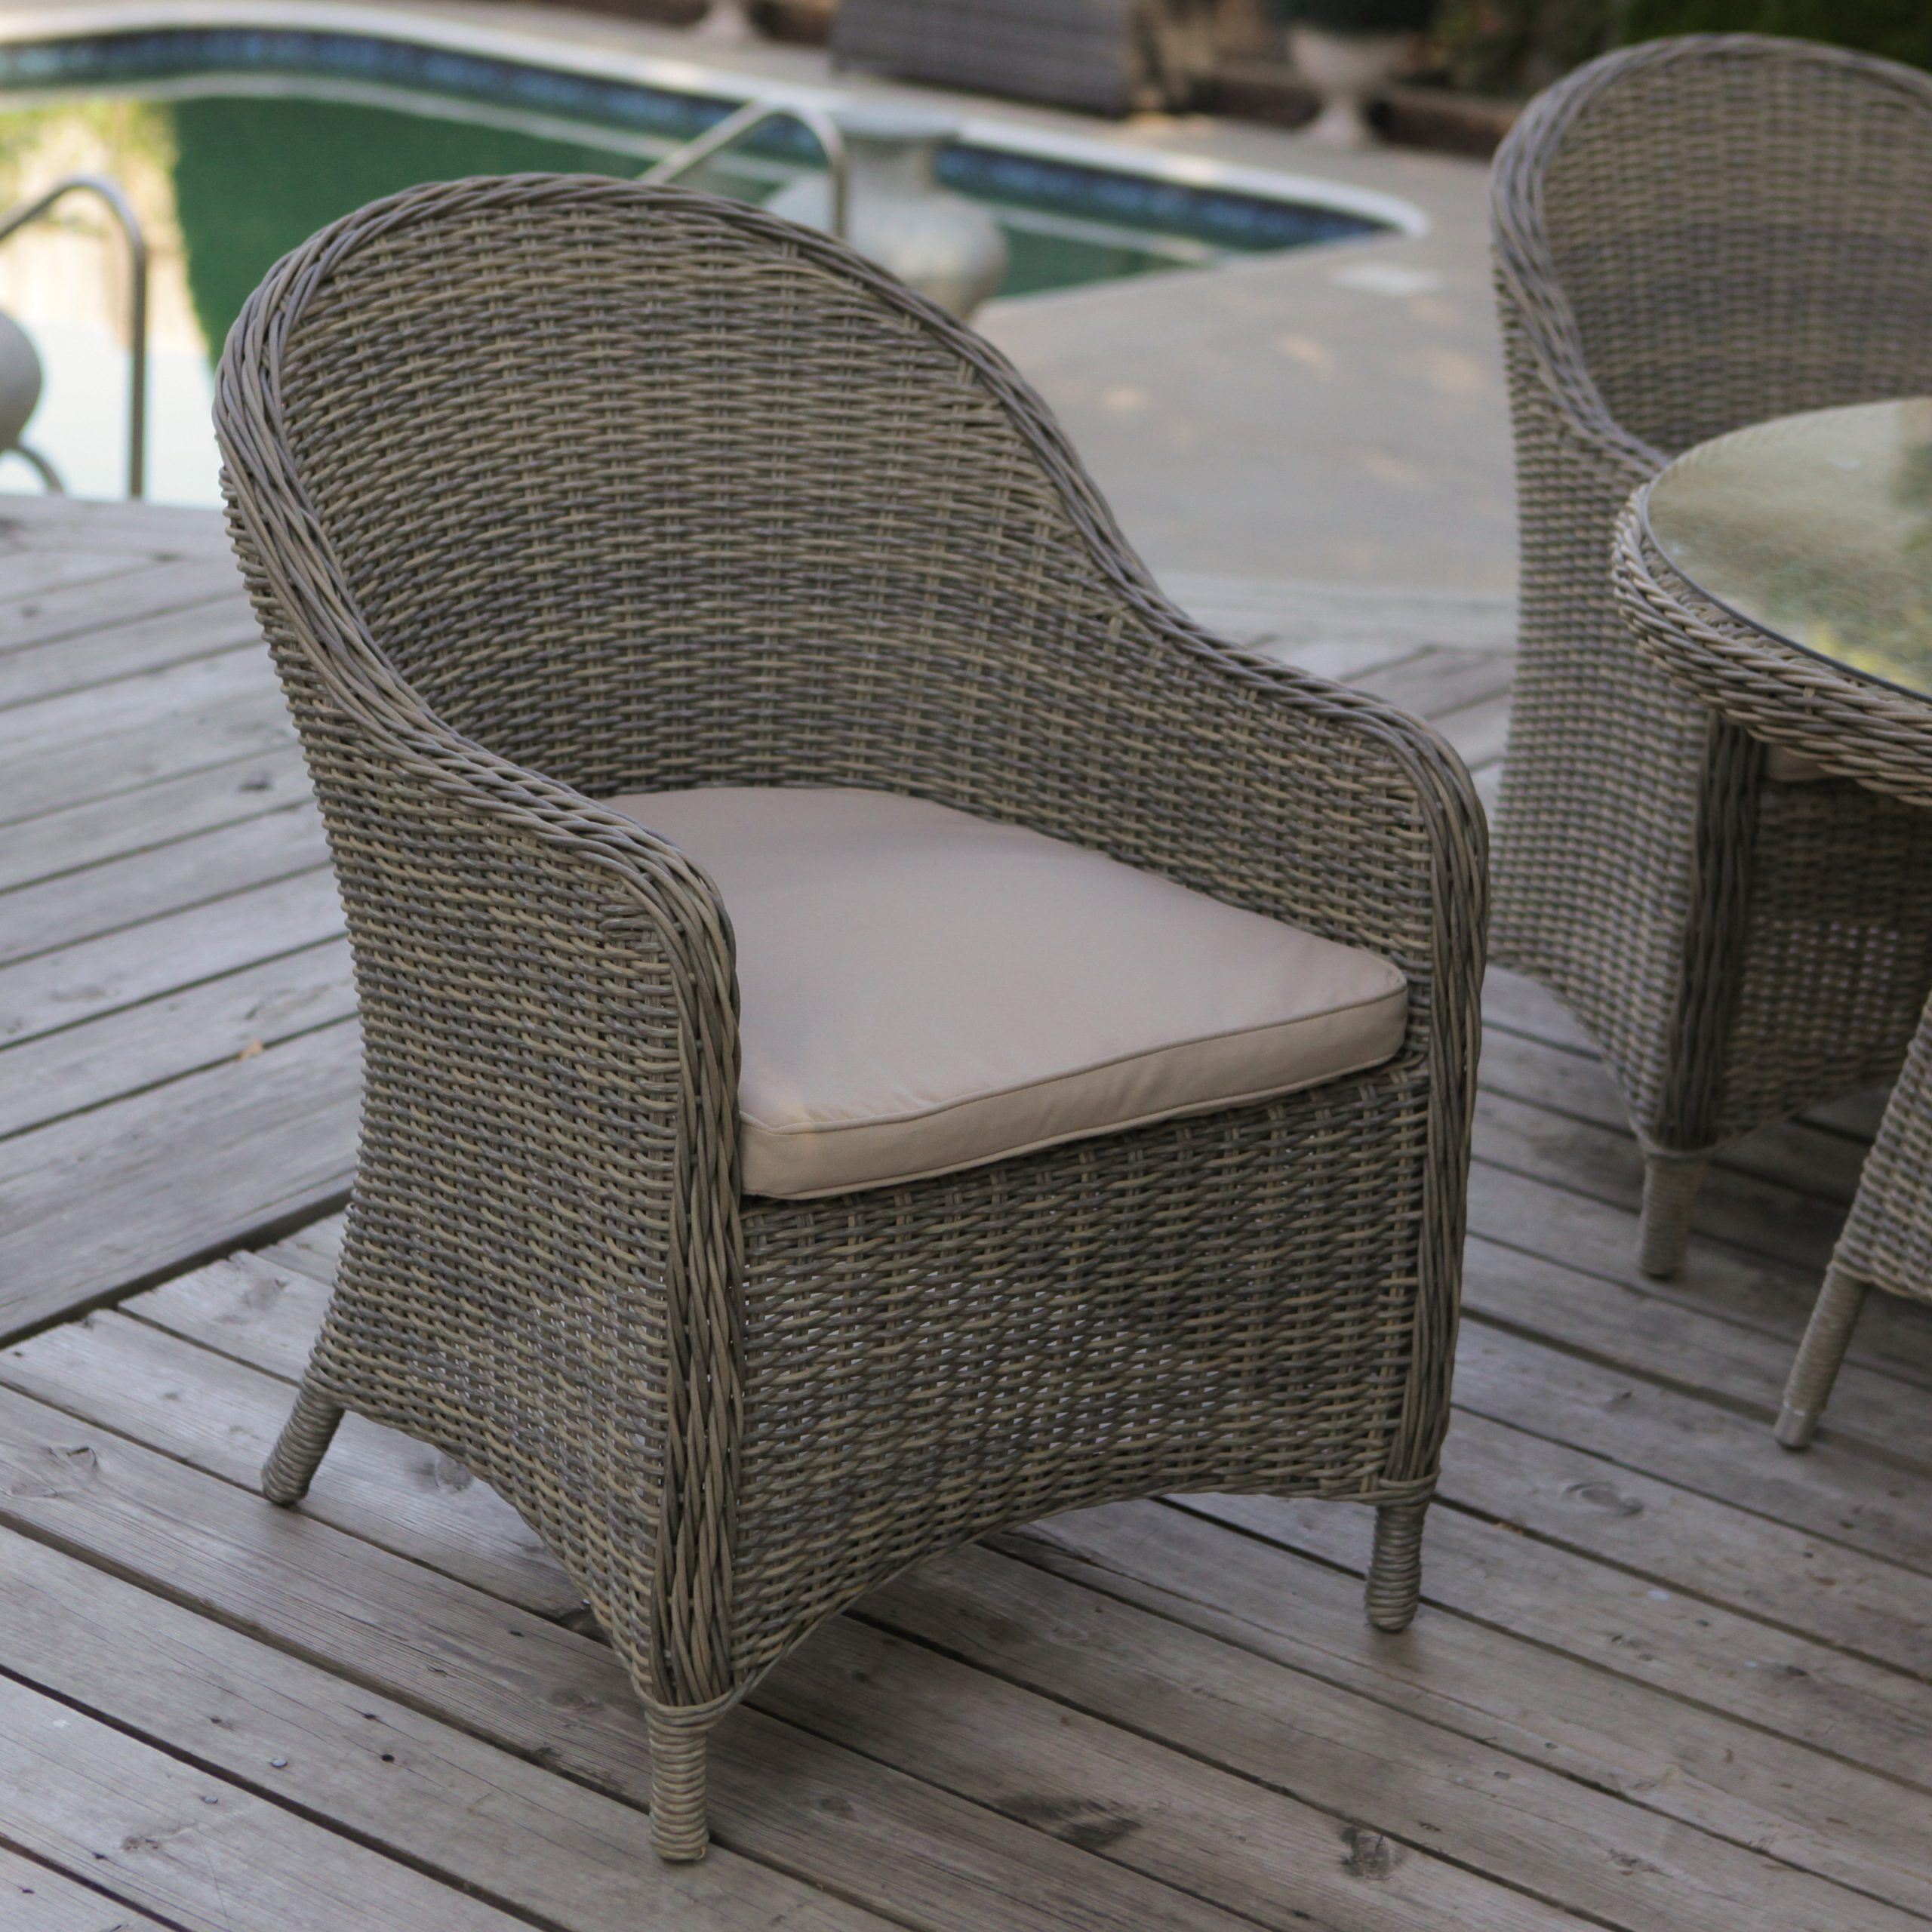 Mingle All Weather Wicker Patio Dining Chair – Set Of 2 – Outdoor Regarding Outdoor Wicker Cafe Dining Sets (View 13 of 15)